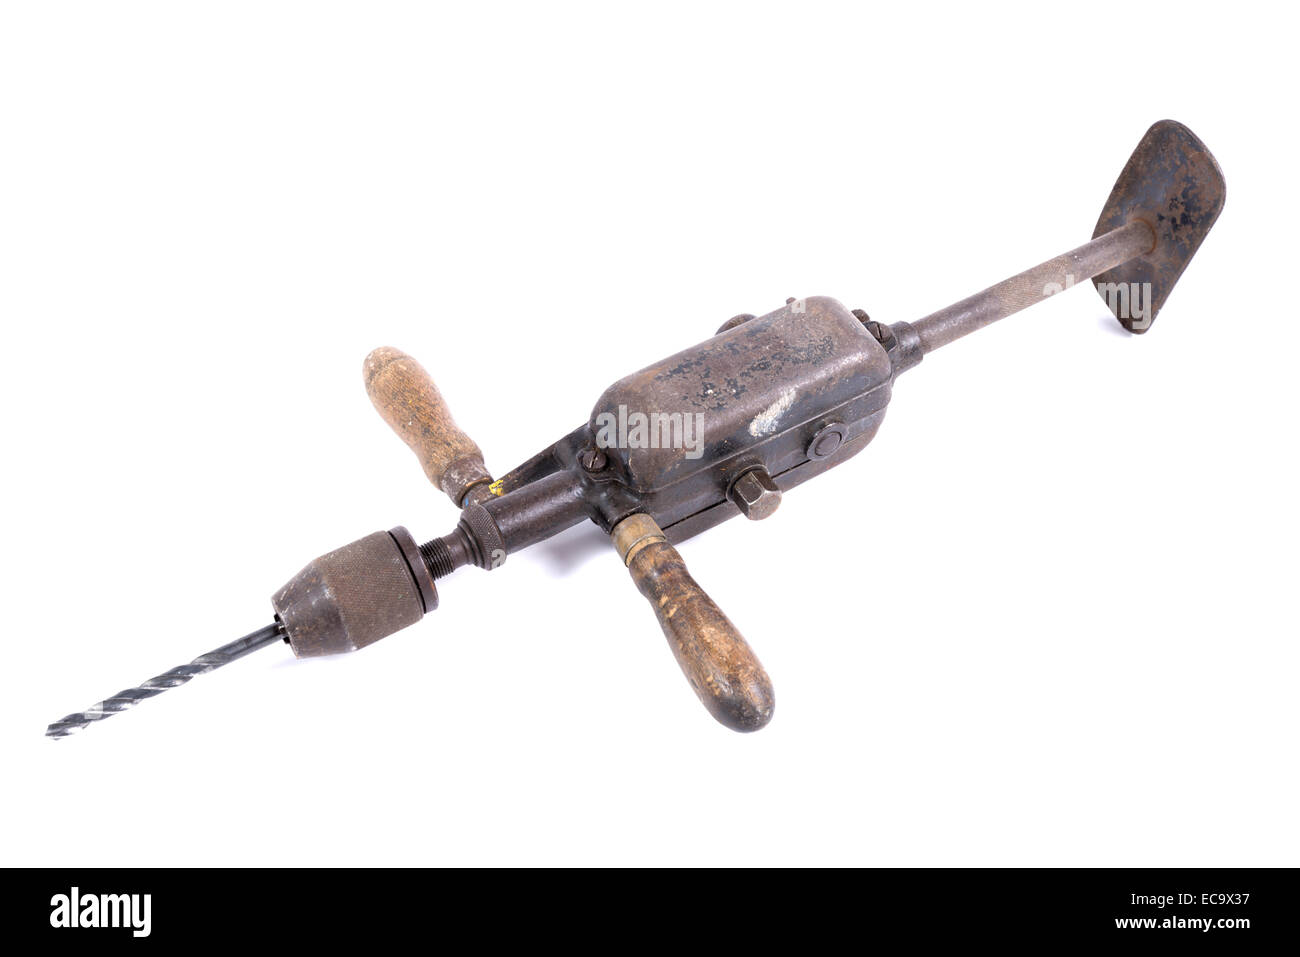 Old Single Pinion Manual Hand Drill Stock Photo - Image of background,  driller: 107114292